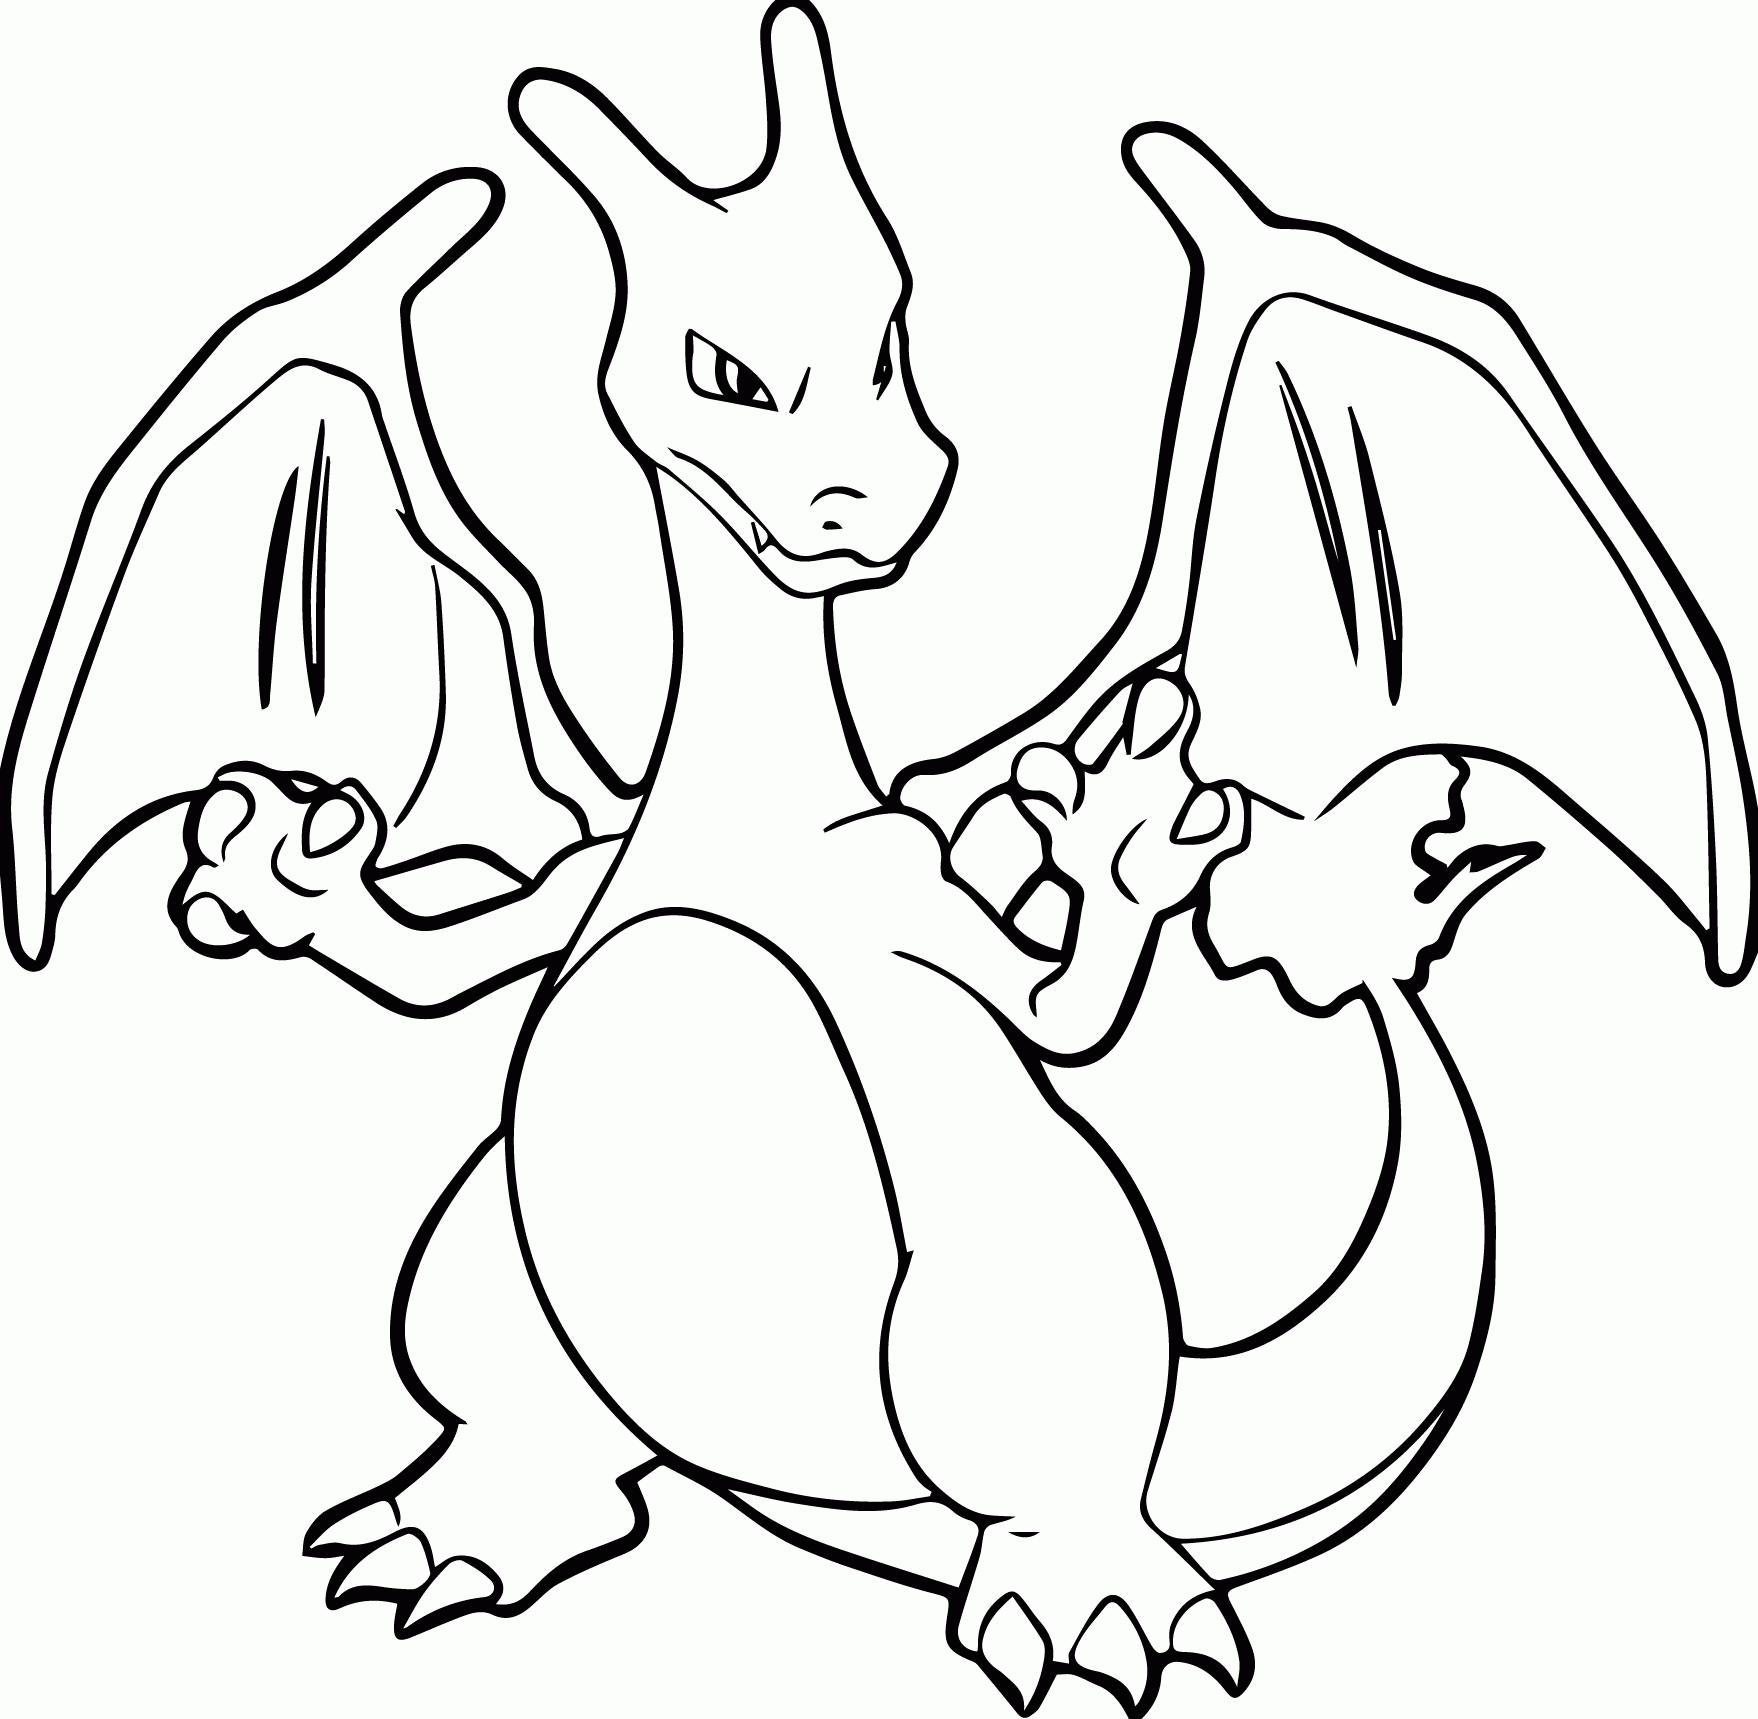 Pintable Charizard Pokemon Coloring Pages   Coloring Home